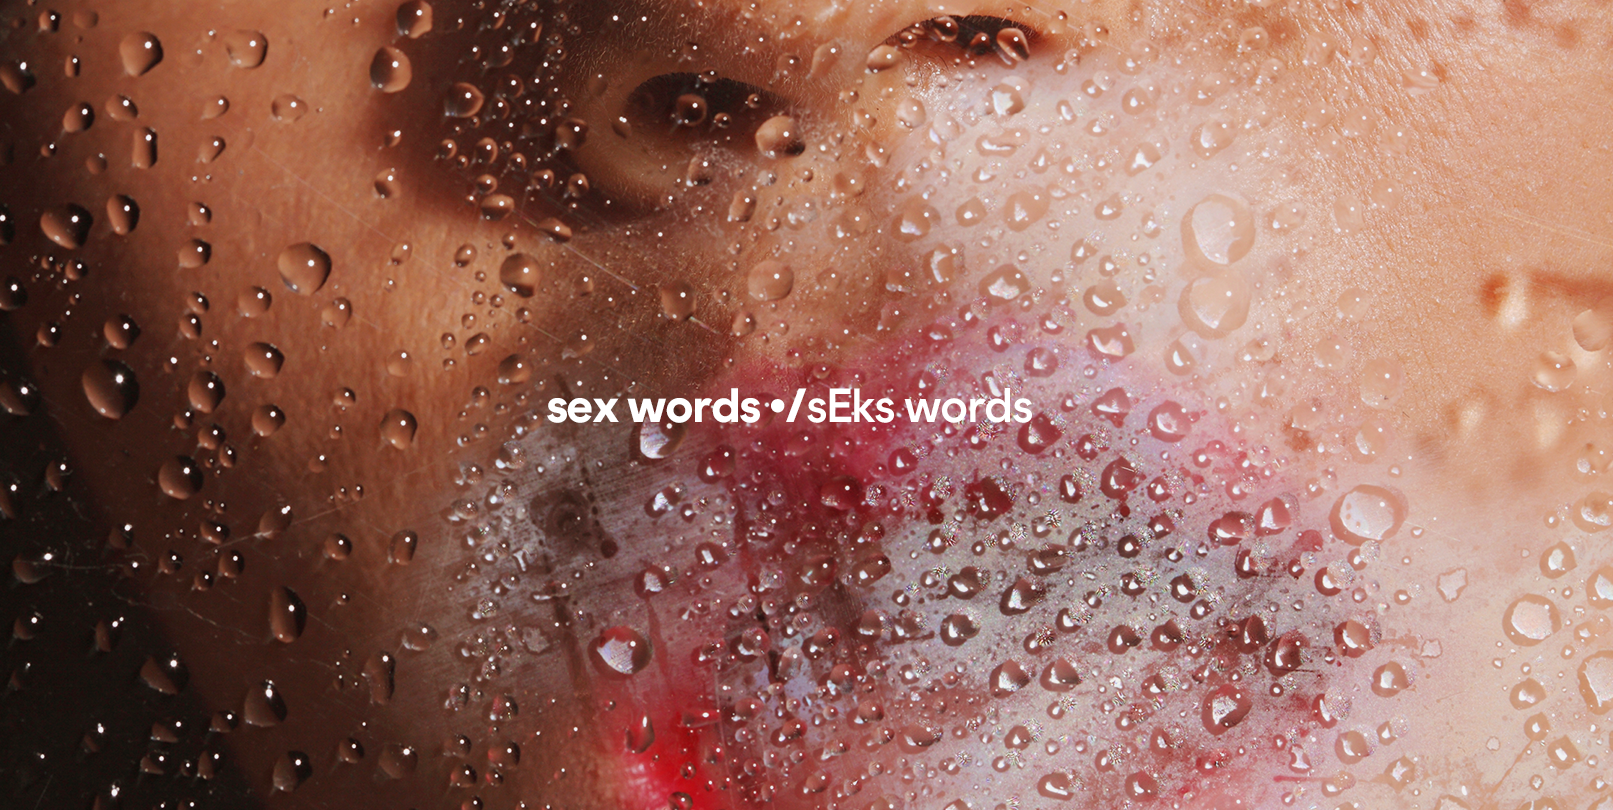 Hot Niked Sexual Entercourse - 111 Sex Words to Know - Sex Slang Glossary and Lingo Definitions